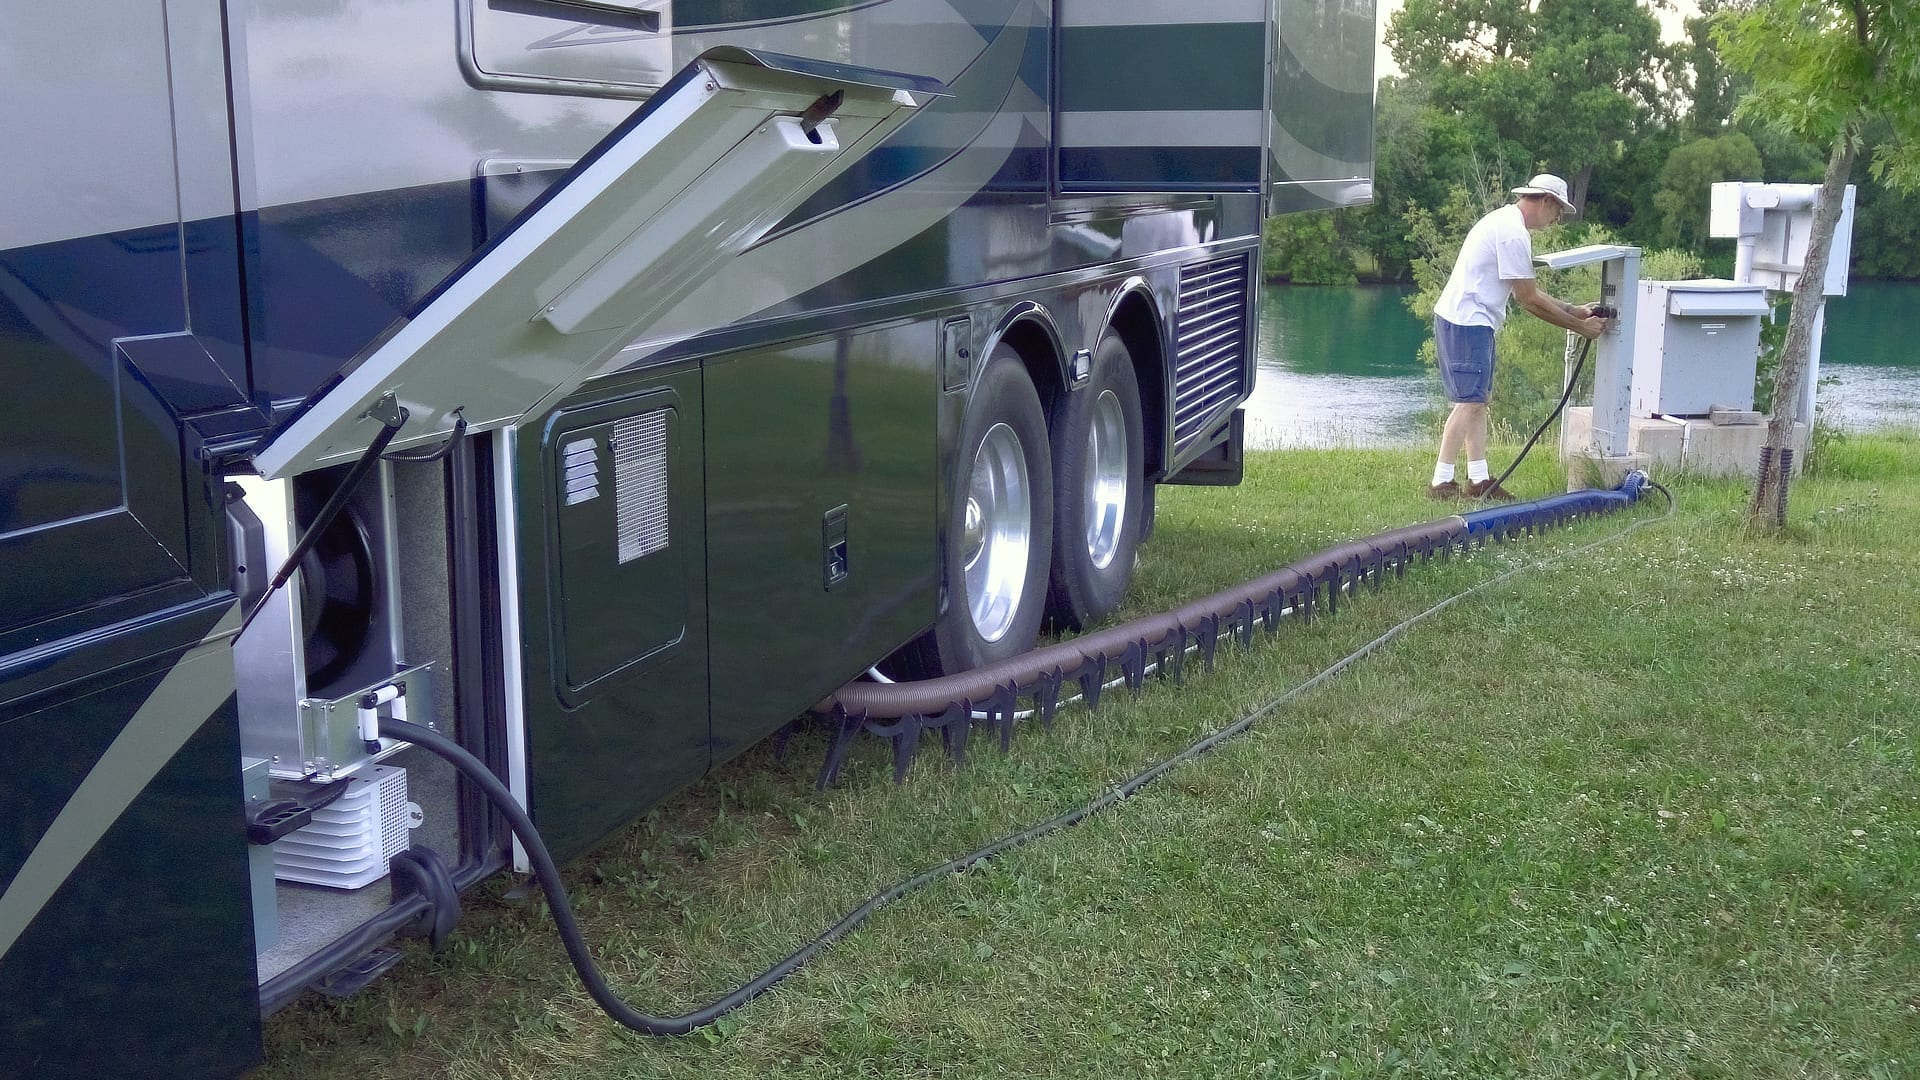 Hooking up an RV at a full hook-up campsite